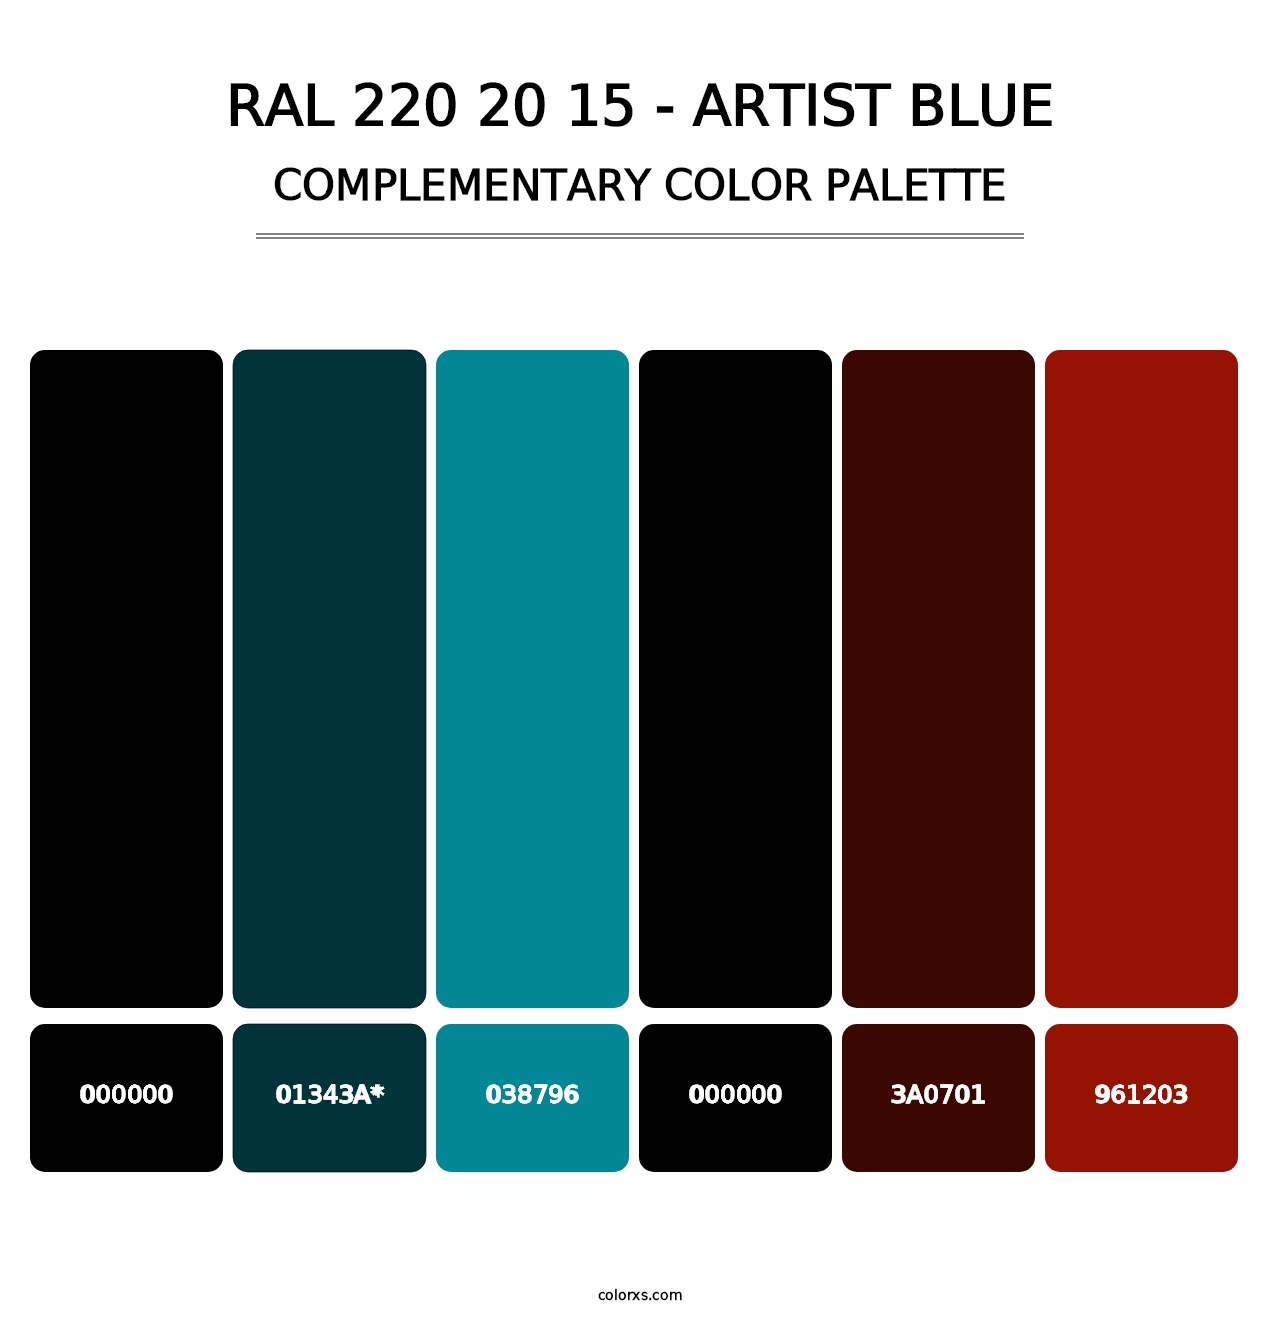 RAL 220 20 15 - Artist Blue - Complementary Color Palette